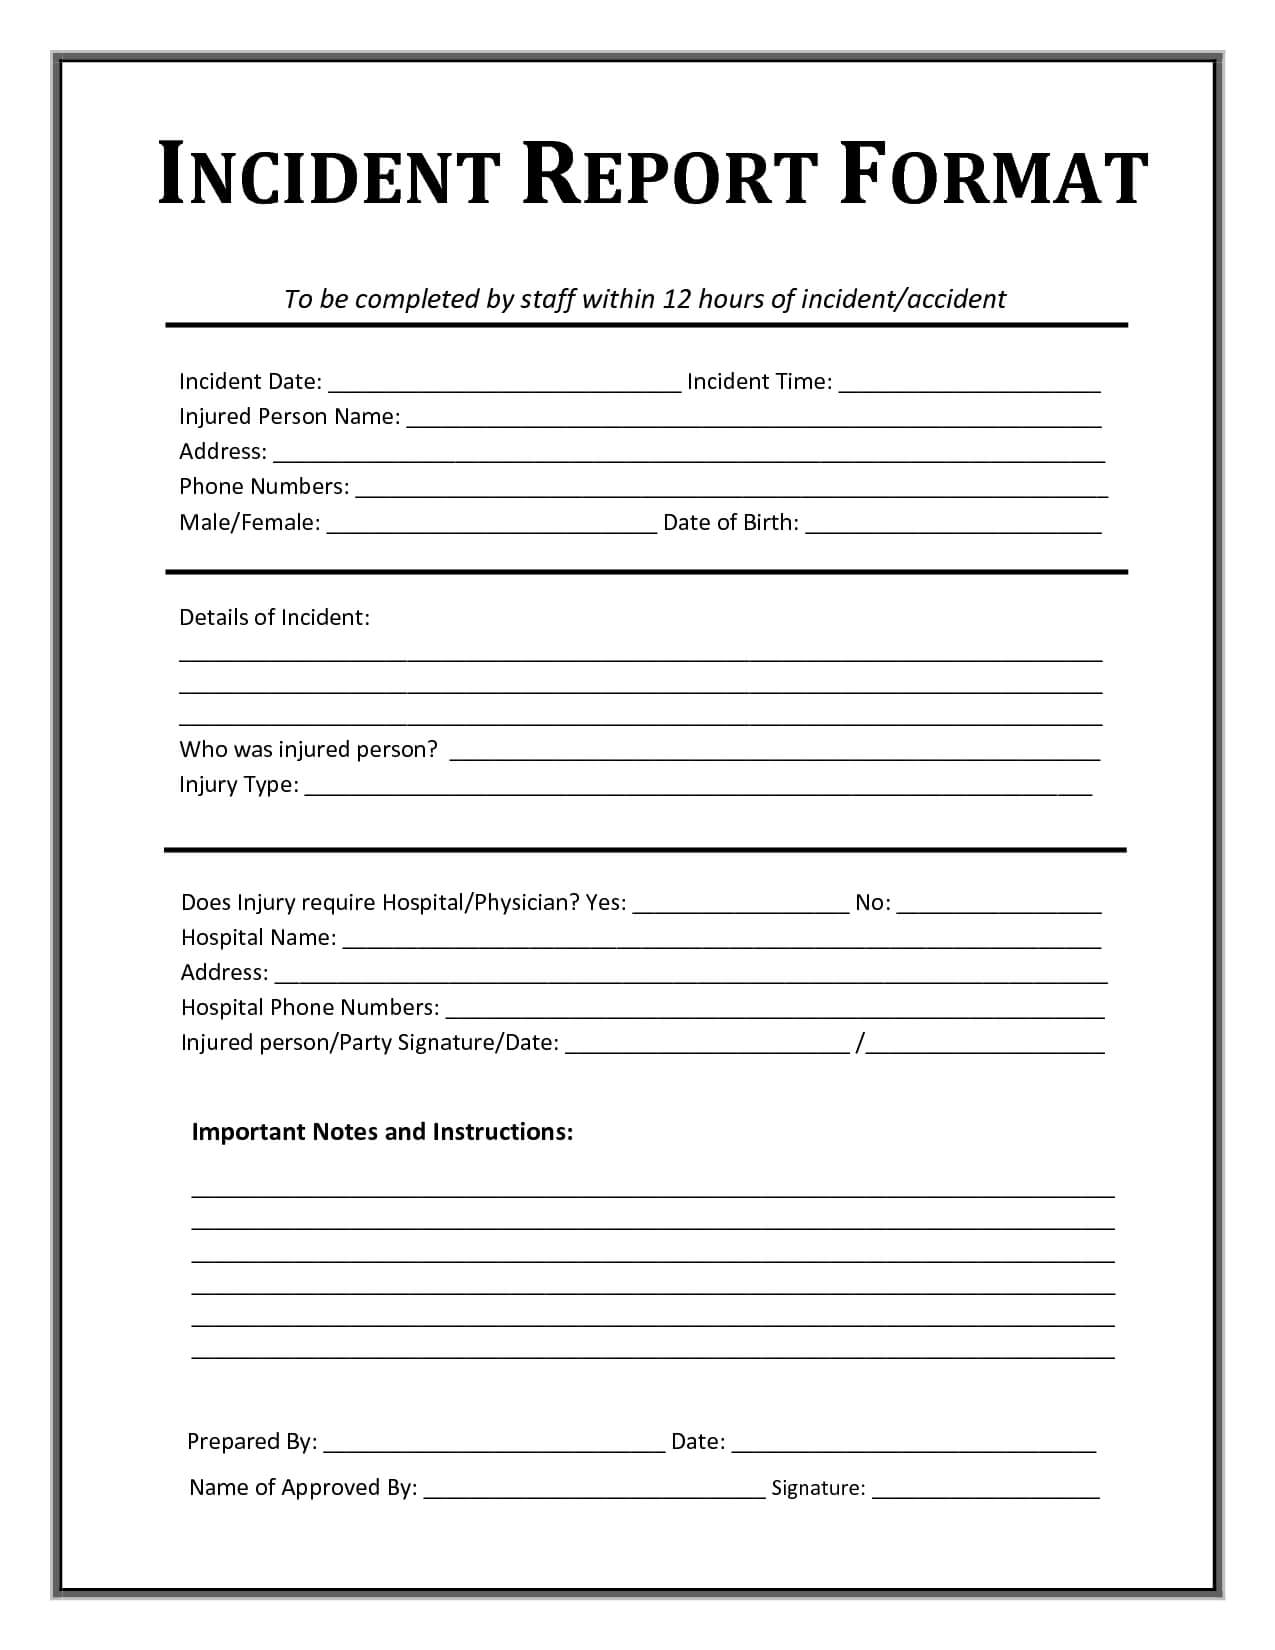 Incident Report Template | Incident Report Form, Incident For It Incident Report Template